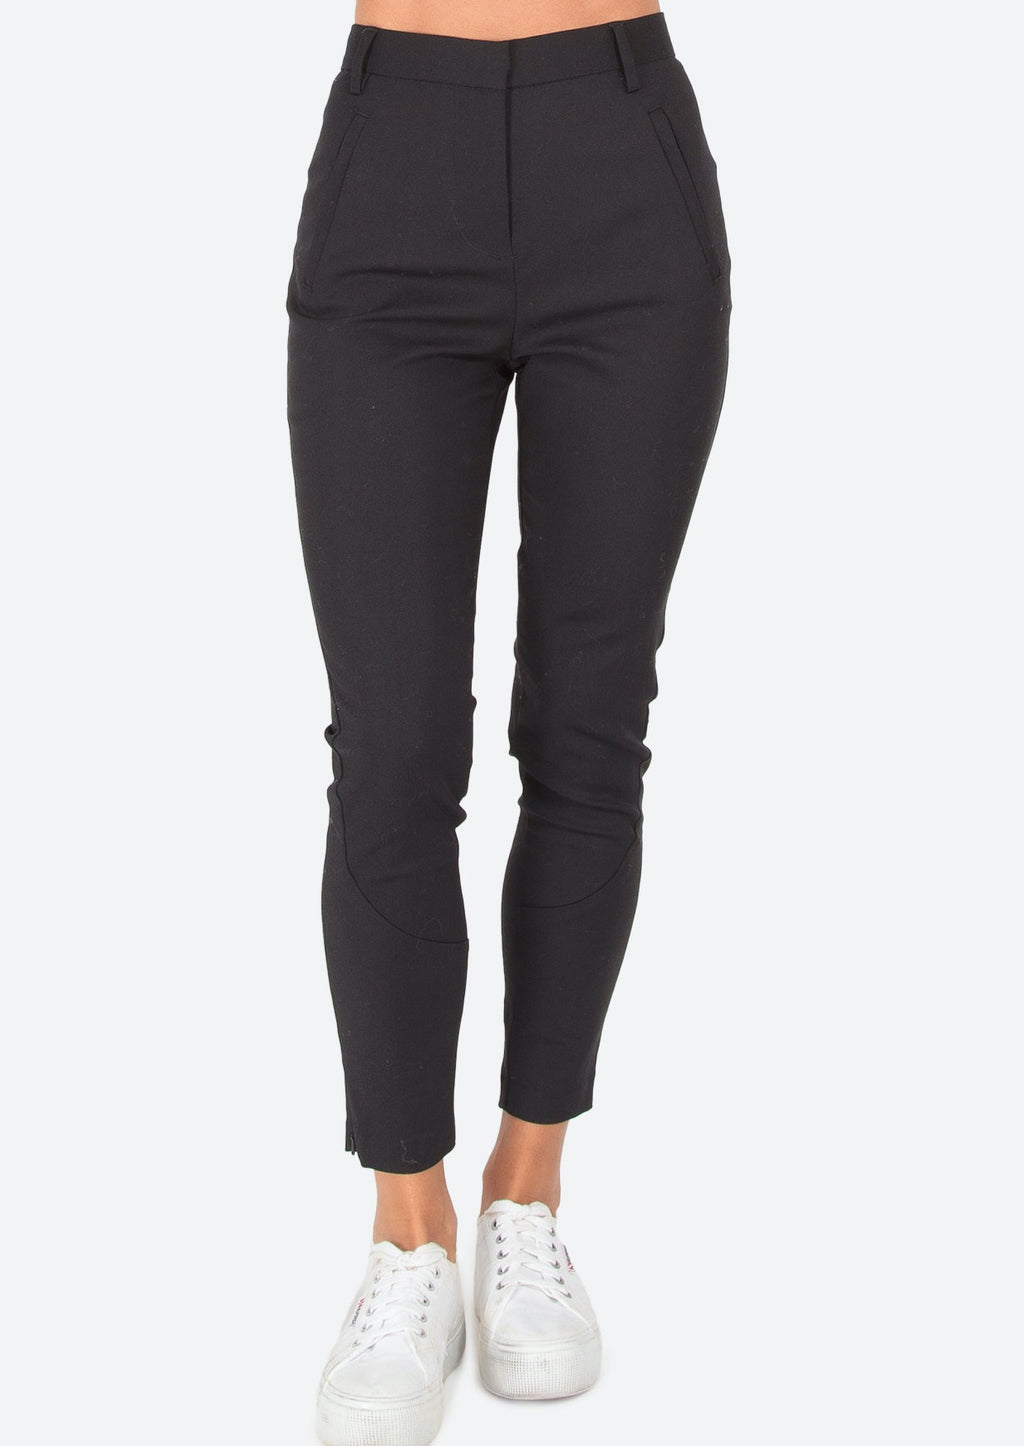 Nest Pants - Black, by Ridley  A super comfortable slight stretch pant that can be dressed up or down.  We love the streamlined features and 7/8th length for the perfect fit and maximum versatility.  Features:  7/8th leg length  Side zips at ankle for a slimline fit  Stretch for comfort and shape  Side pockets with zips for a streamlined look  Hook and bar closure at waist